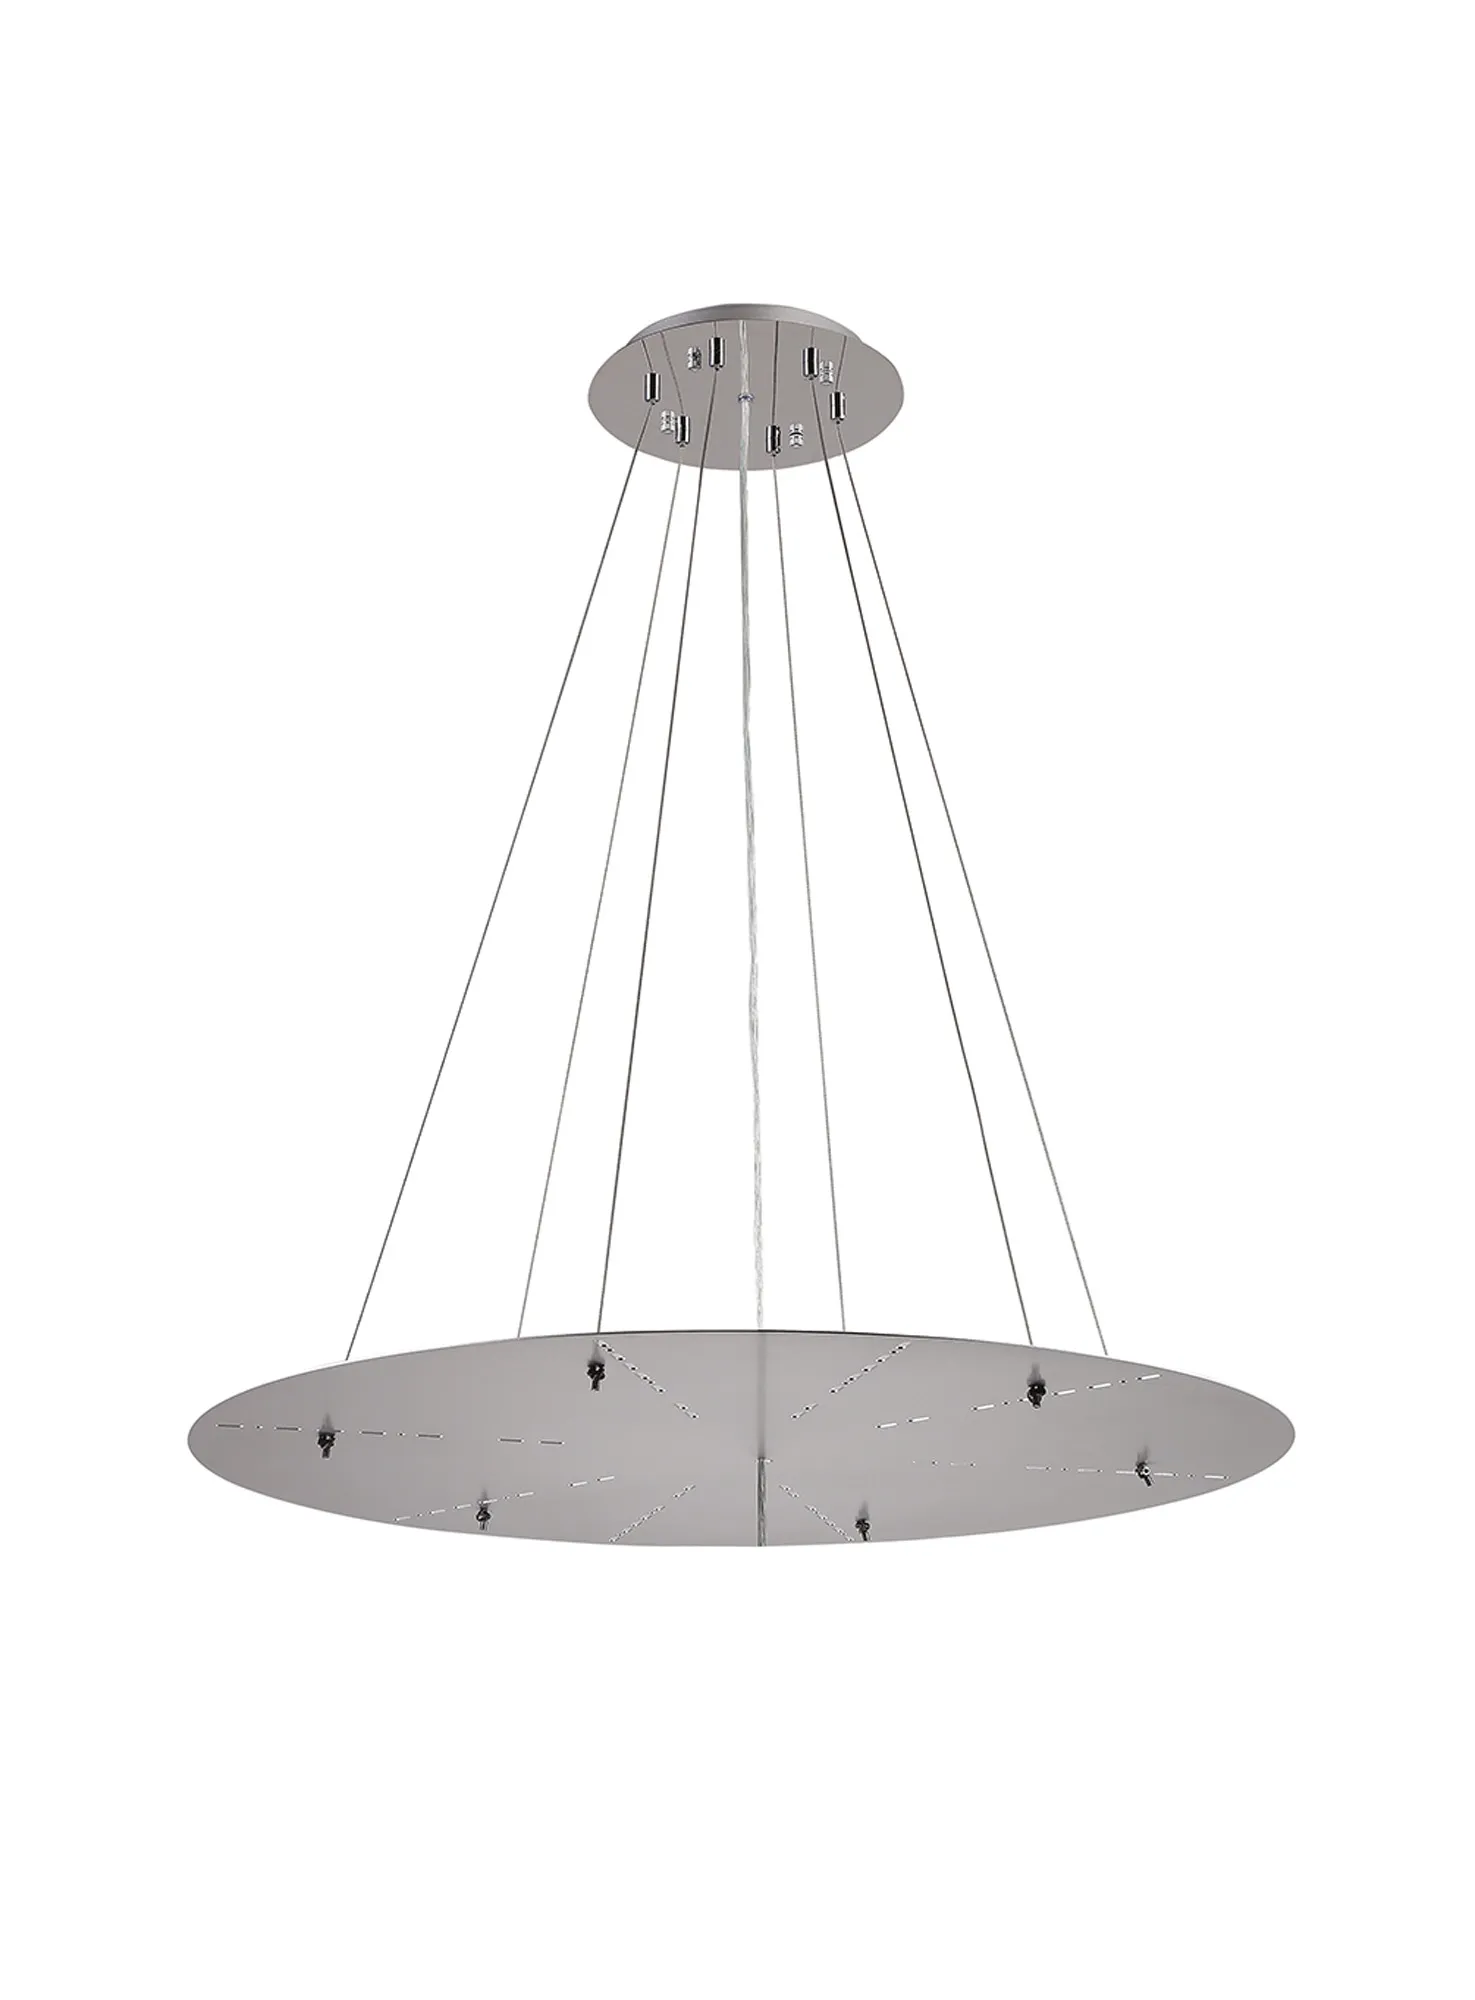 Lowan Ancillary Products Deco Ceiling Accessories